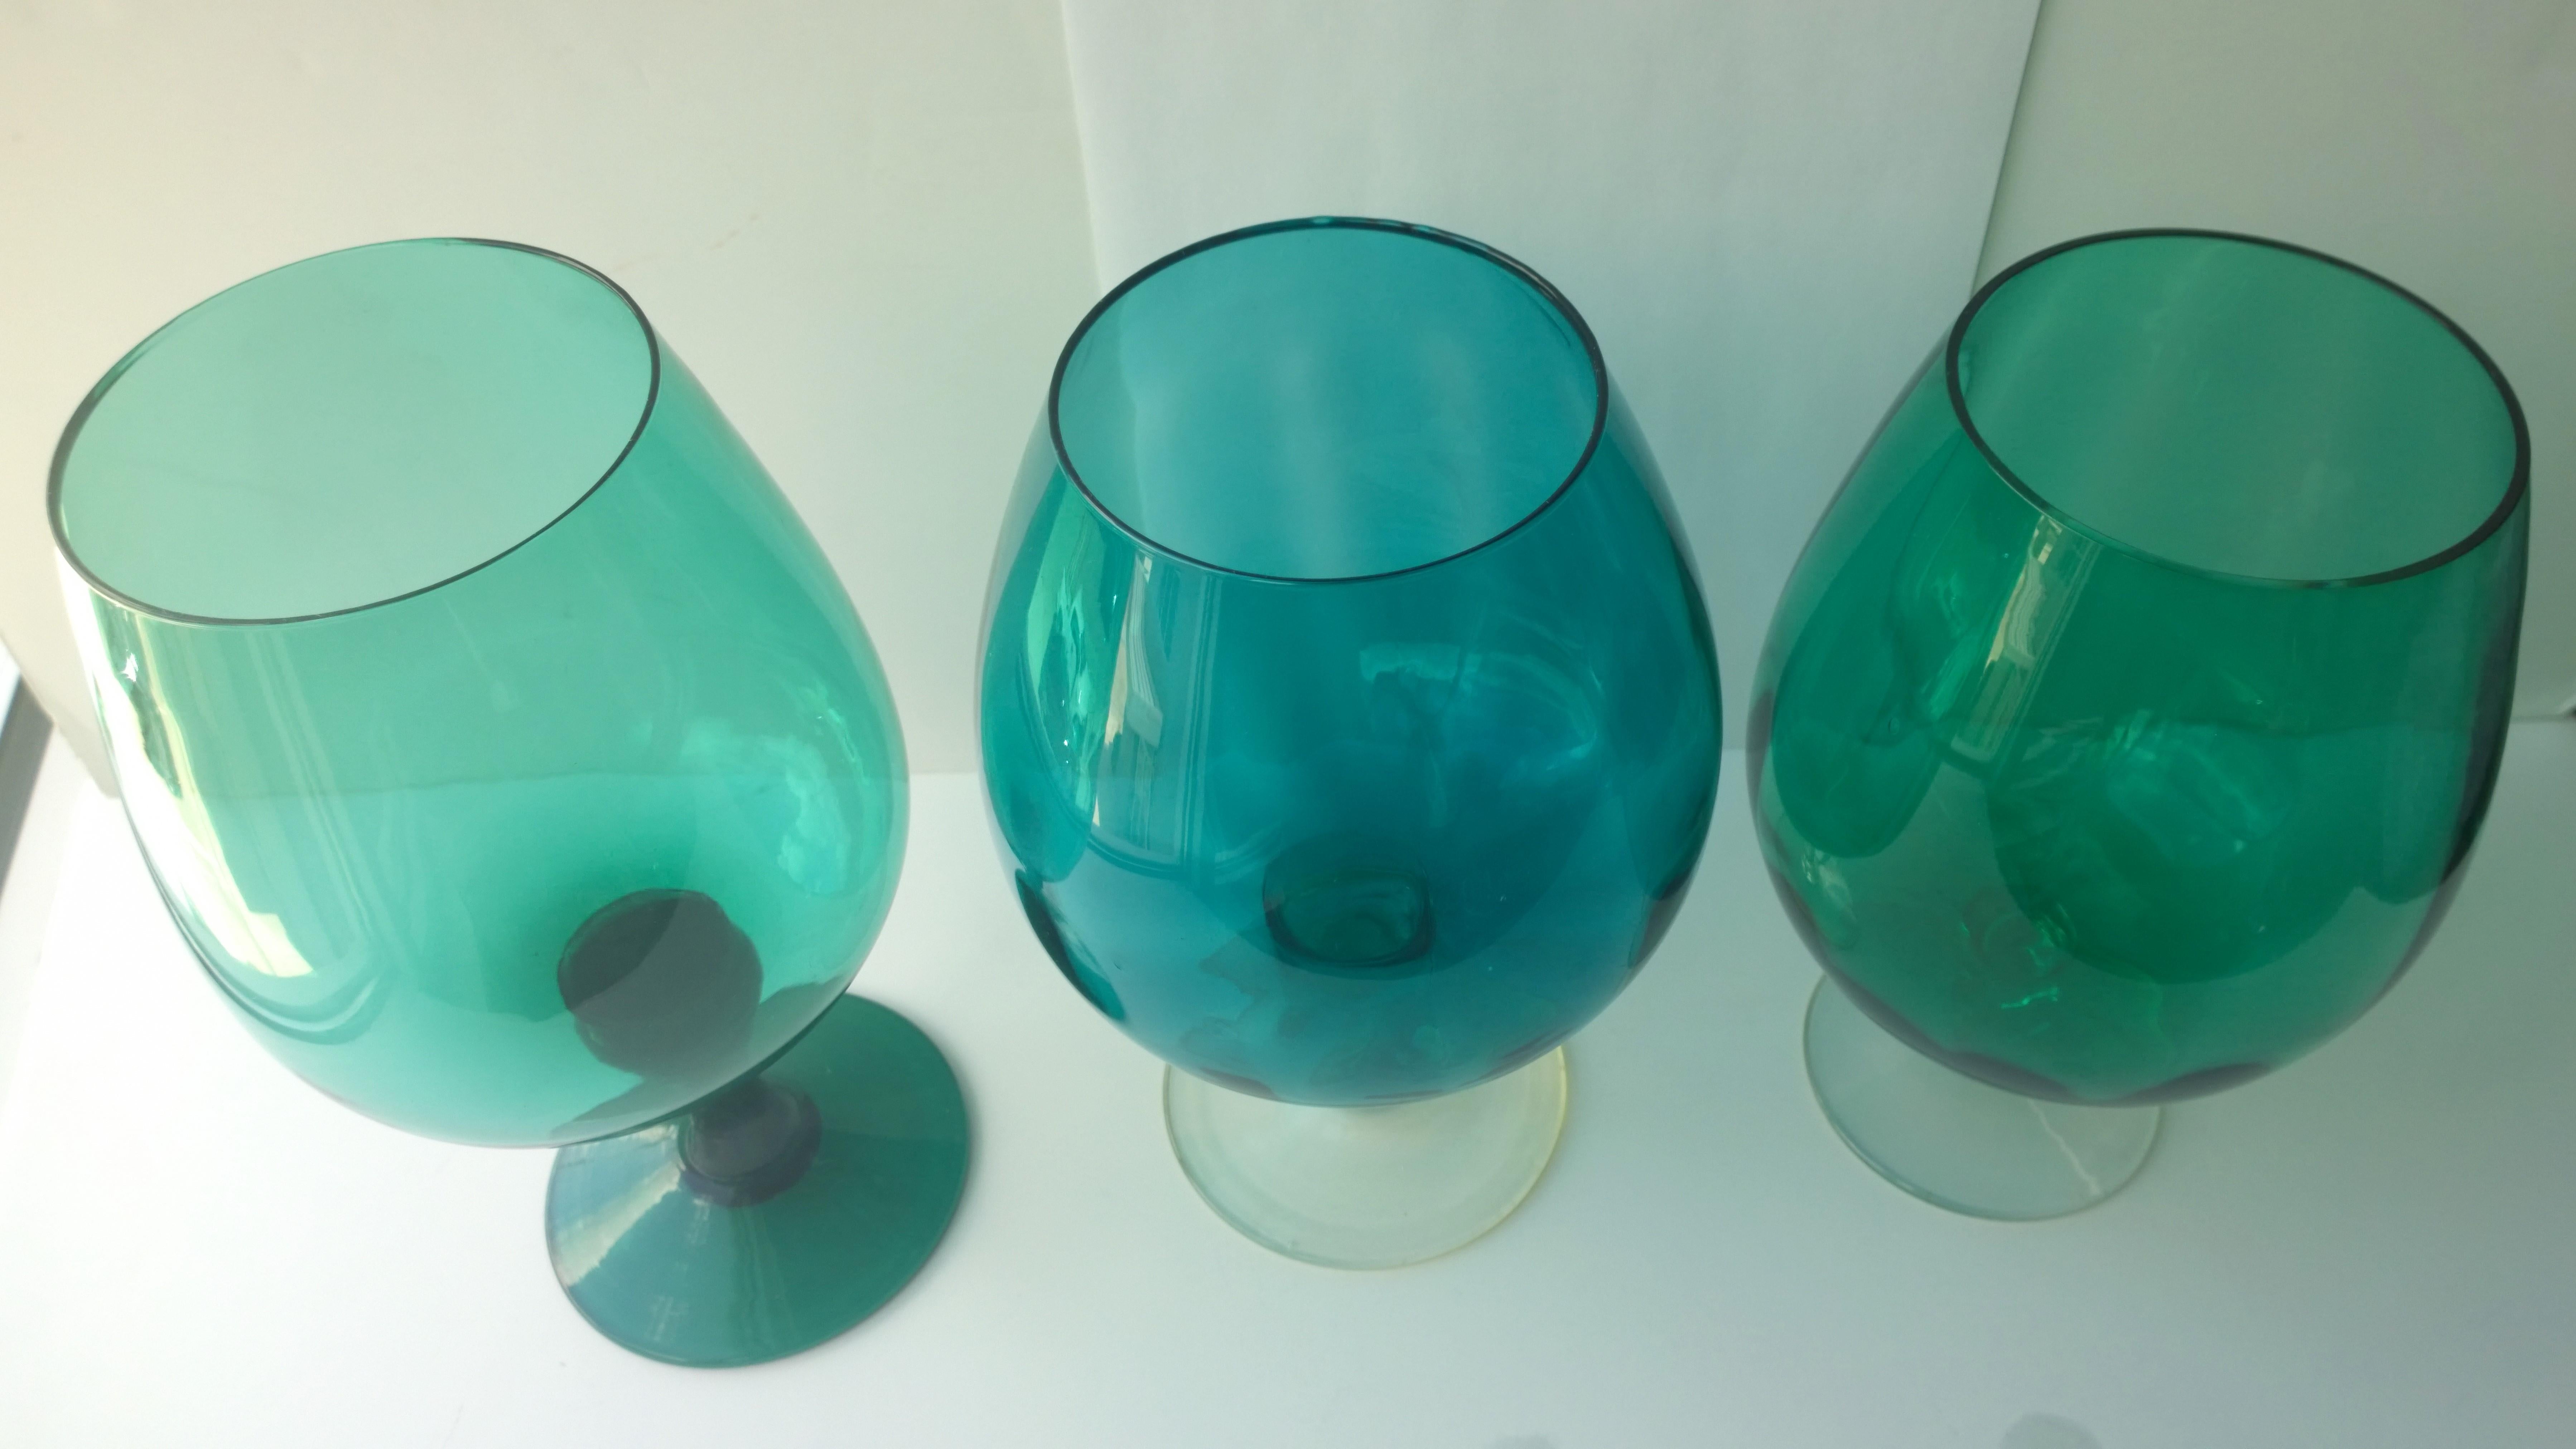 Offered are three Mid-Century Modern hand blown oversized brandy snifters or vases in emerald, teal, peridot (Sold) and Monterey bay green glass with clear glass stems. Would look great as decor, with flowers or on a bar or bar cart. Can be